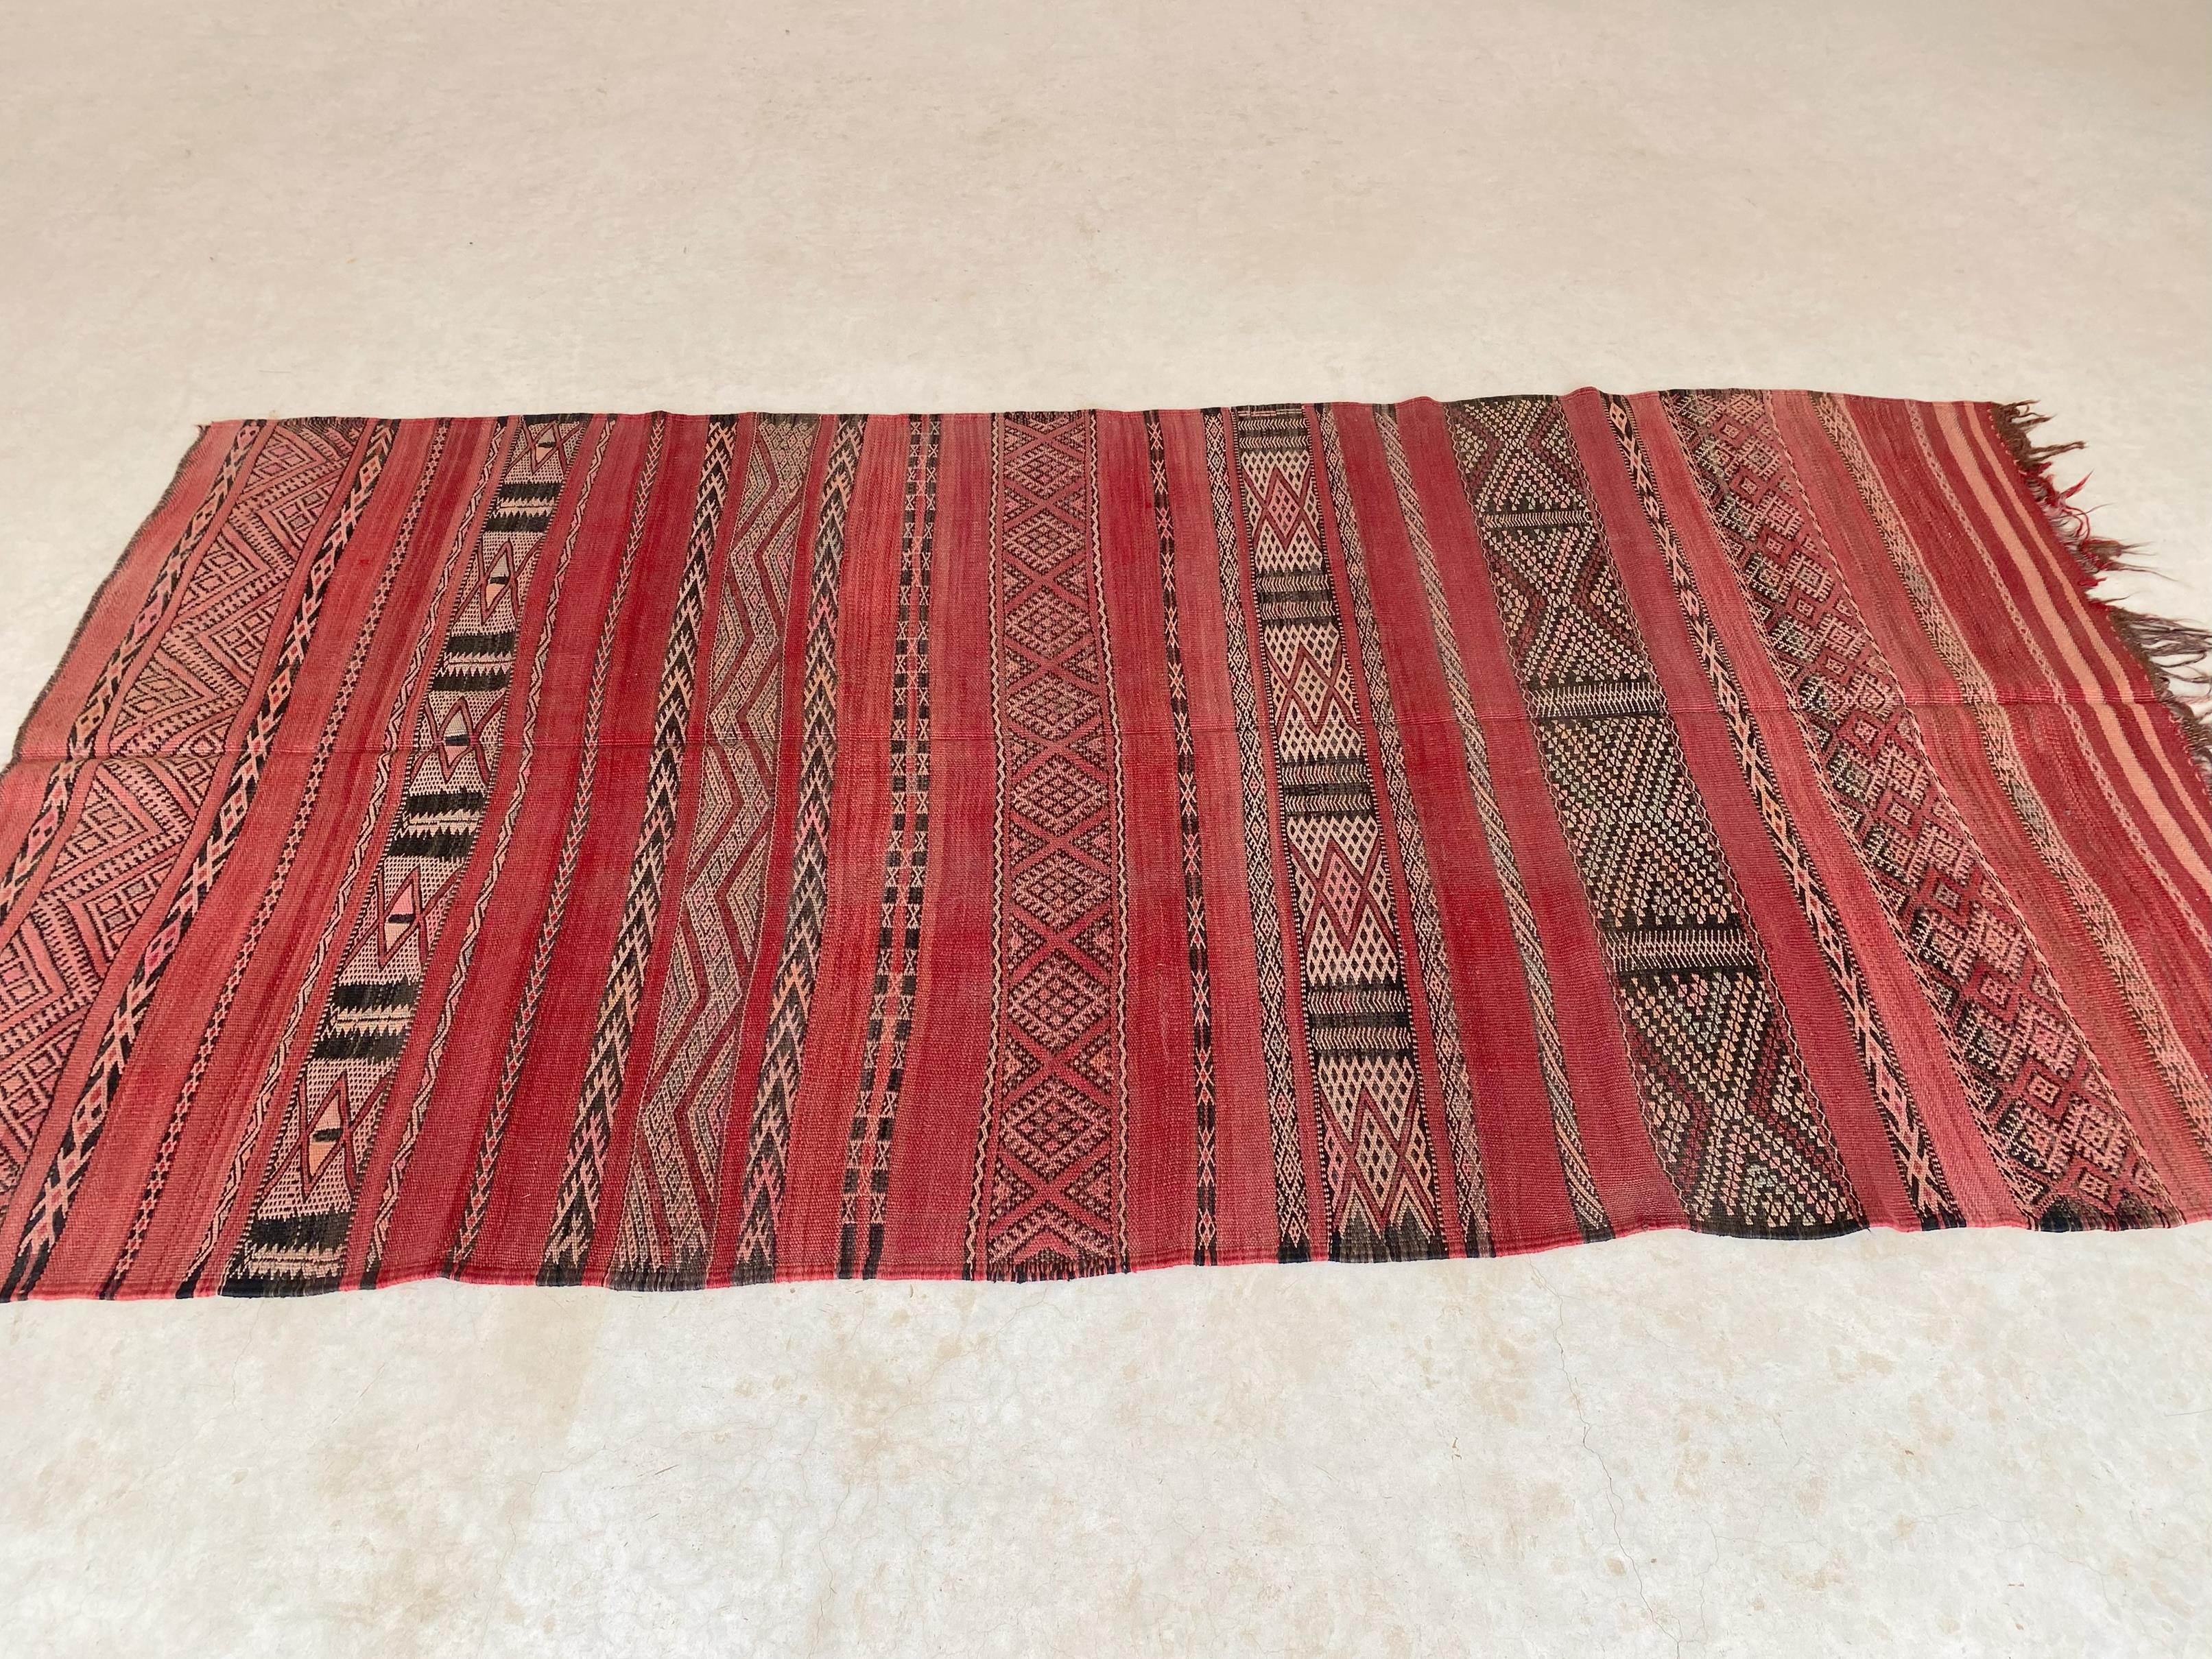 Vintage Moroccan Kilim rug - Red - 5x9.2feet / 152x282cm In Good Condition For Sale In Marrakech, MA